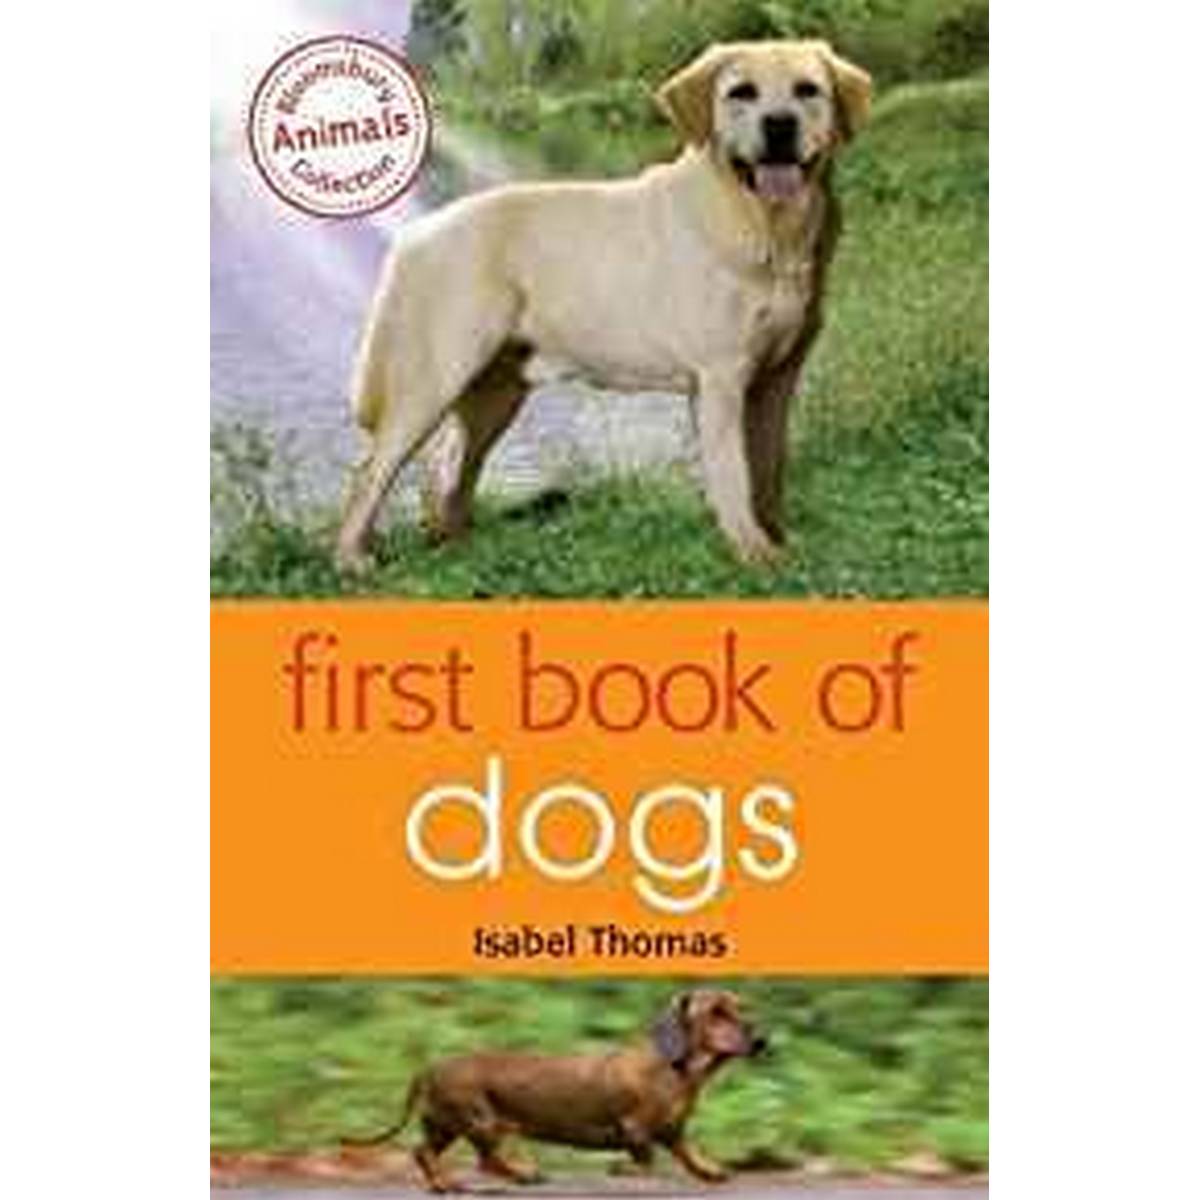 First Book of Dogs